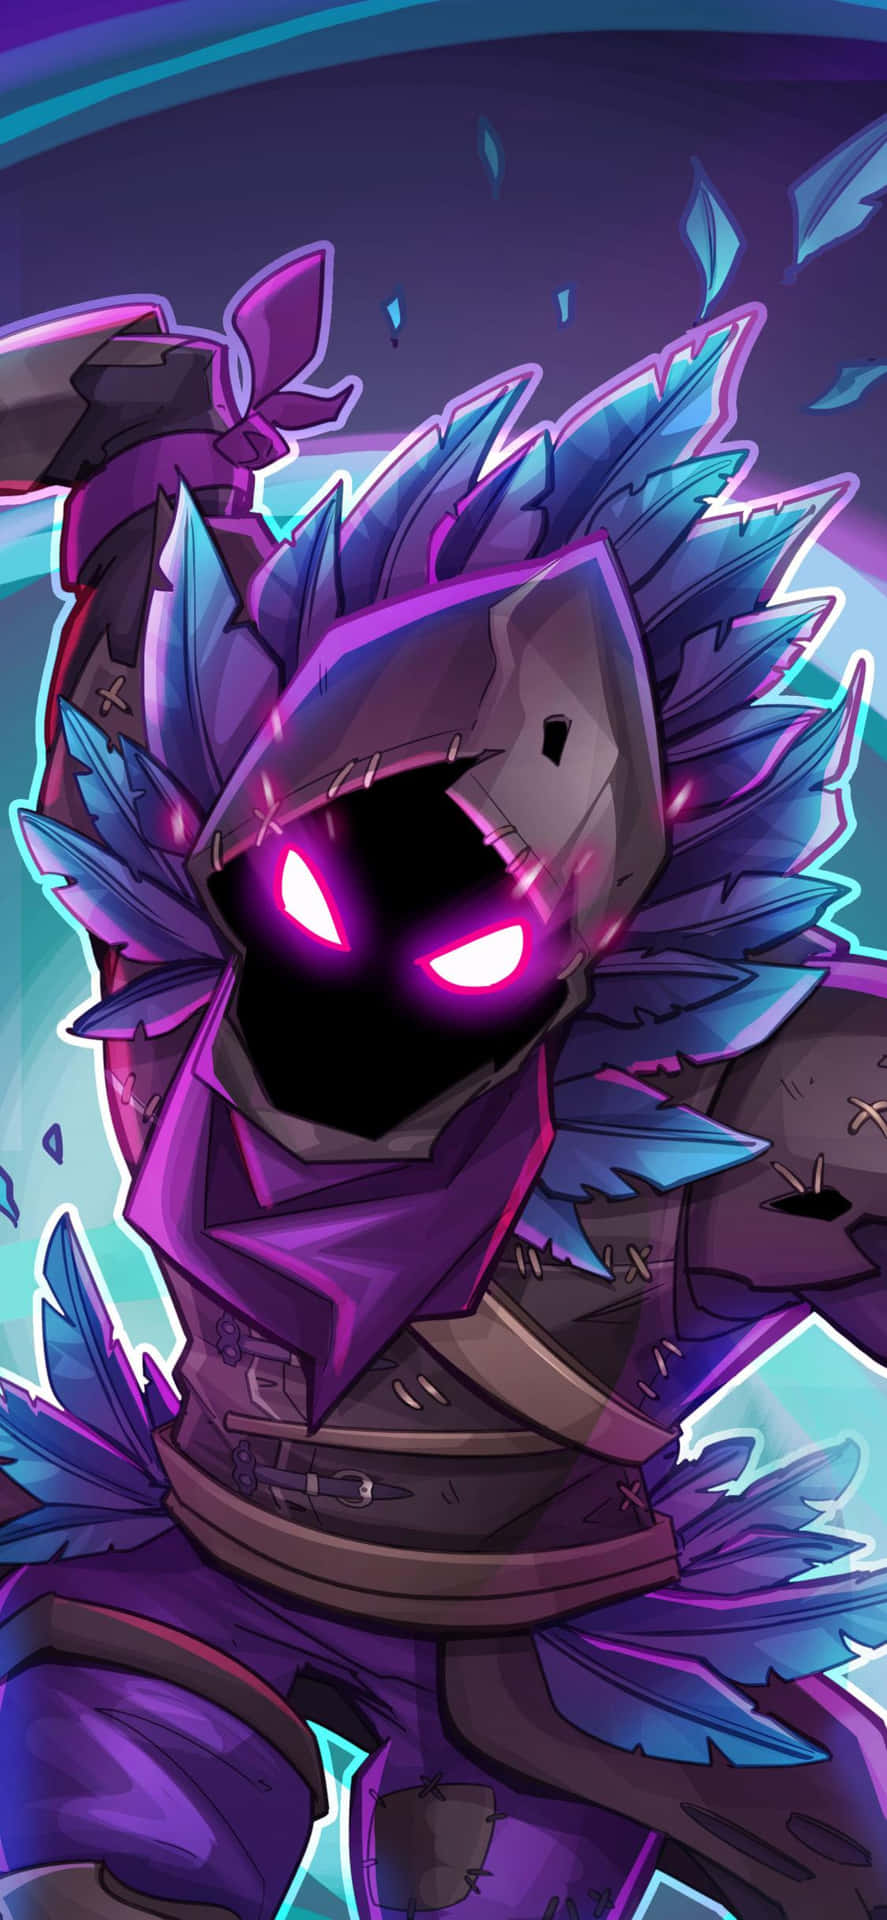 1080x1920 Fortnite Wallpapers for IPhone 6S /7 /8 [Retina HD]